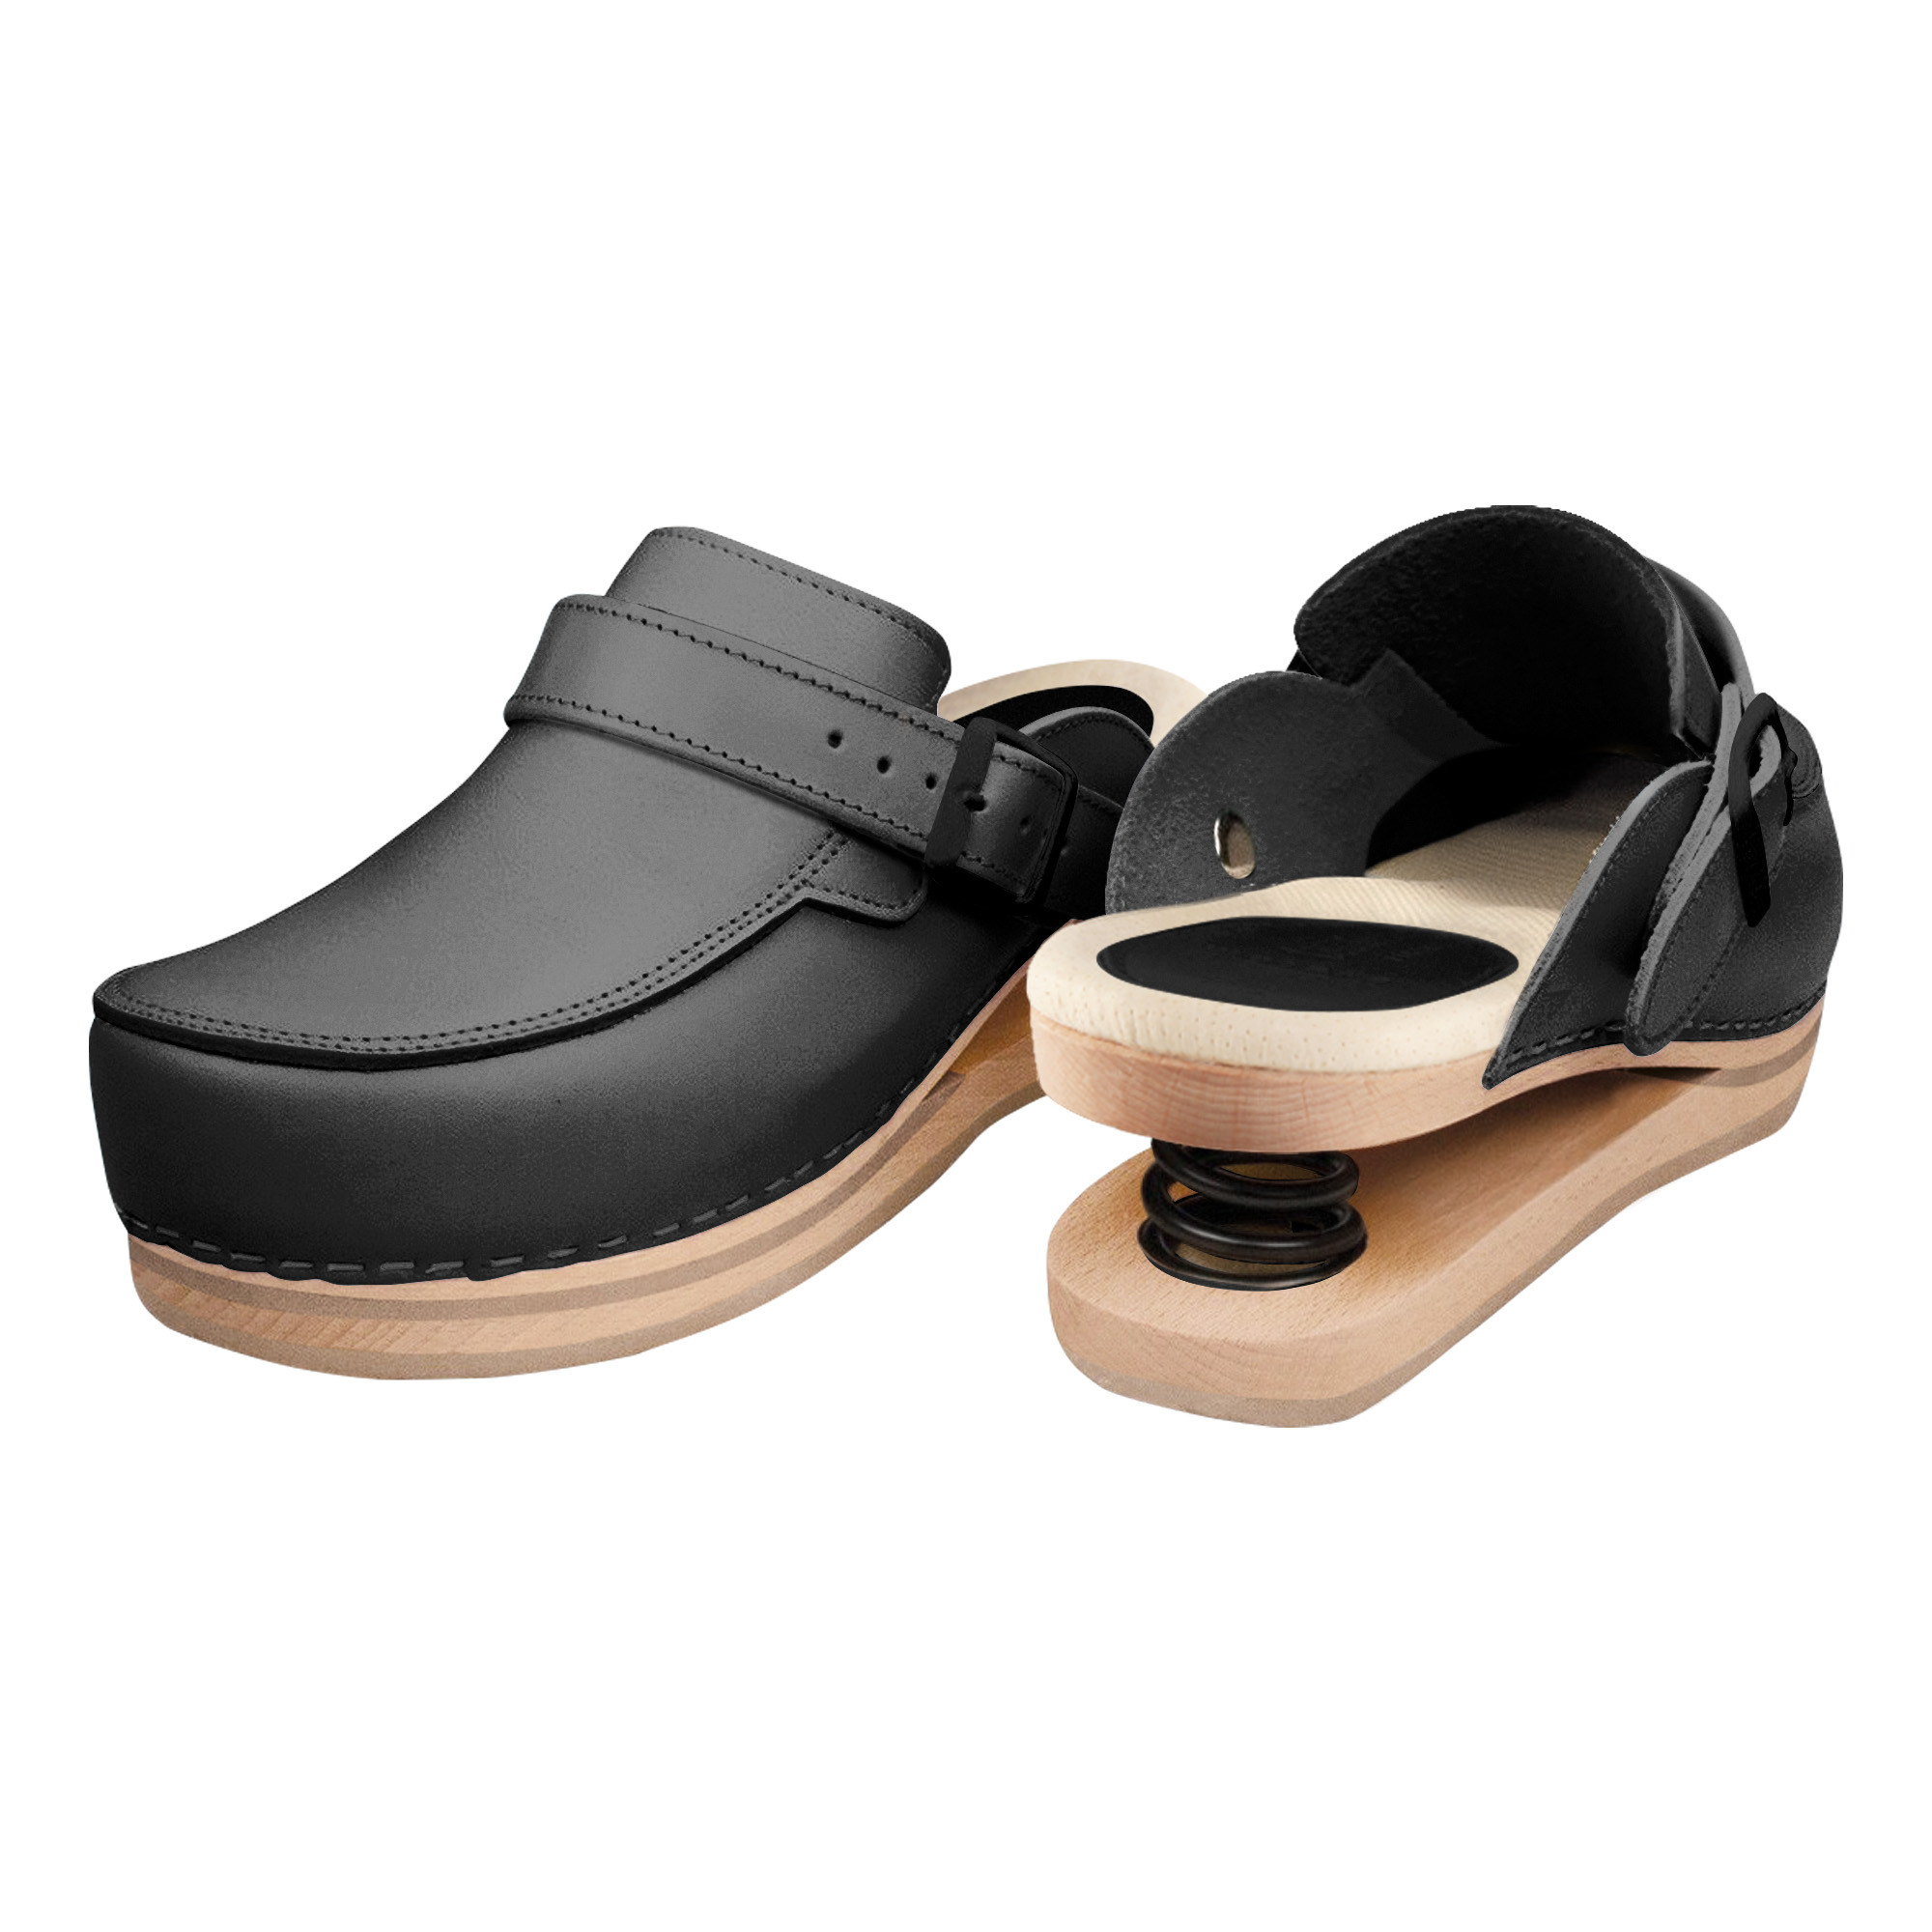 Relax clogs closed with black spring